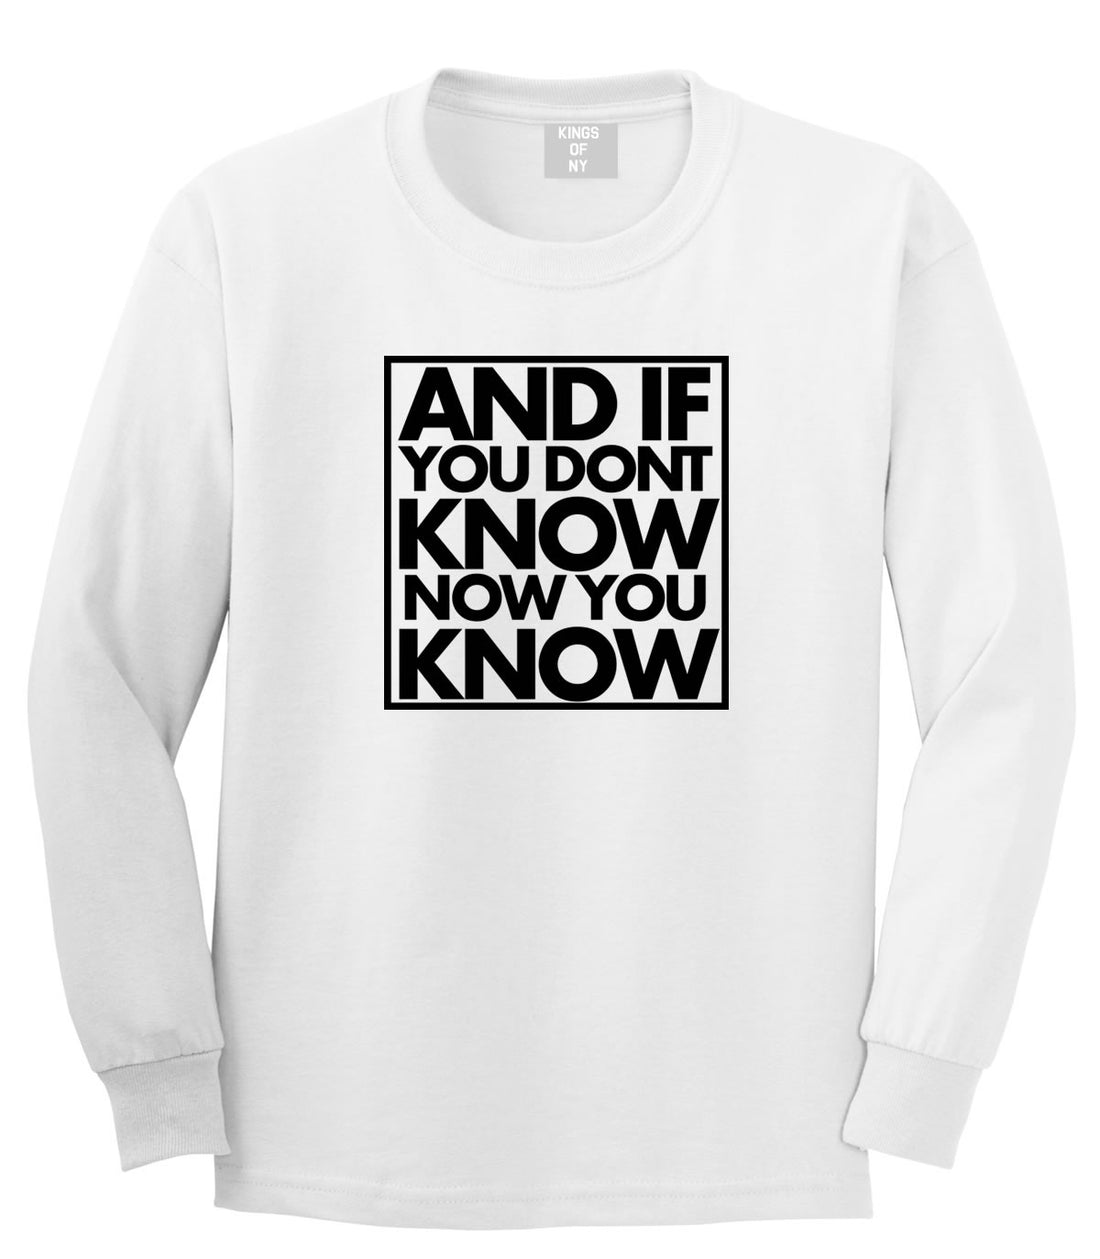 And If You Don't Know Now You Know Long Sleeve T-Shirt in White By Kings Of NY